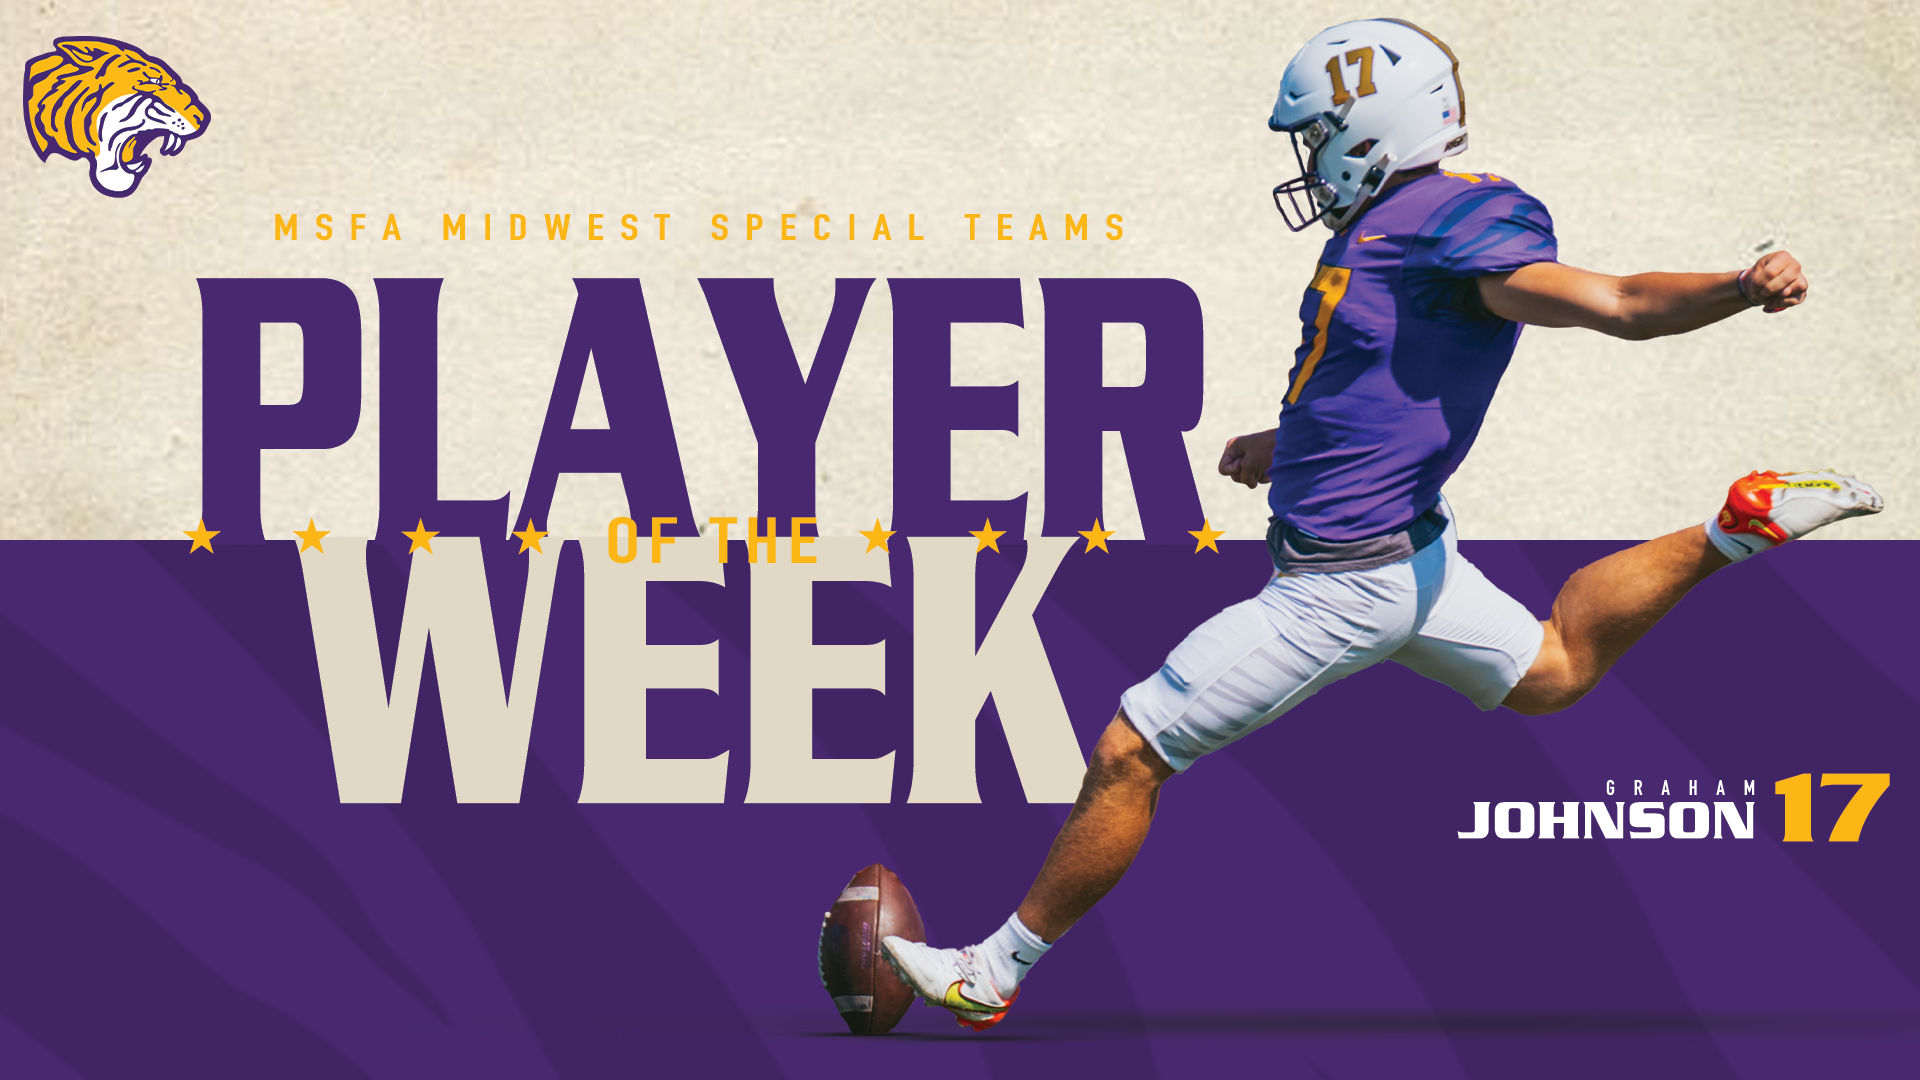 GRAHAM JOHNSON NAMED MSFA SPECIAL TEAMS PLAYER OF THE WEEK